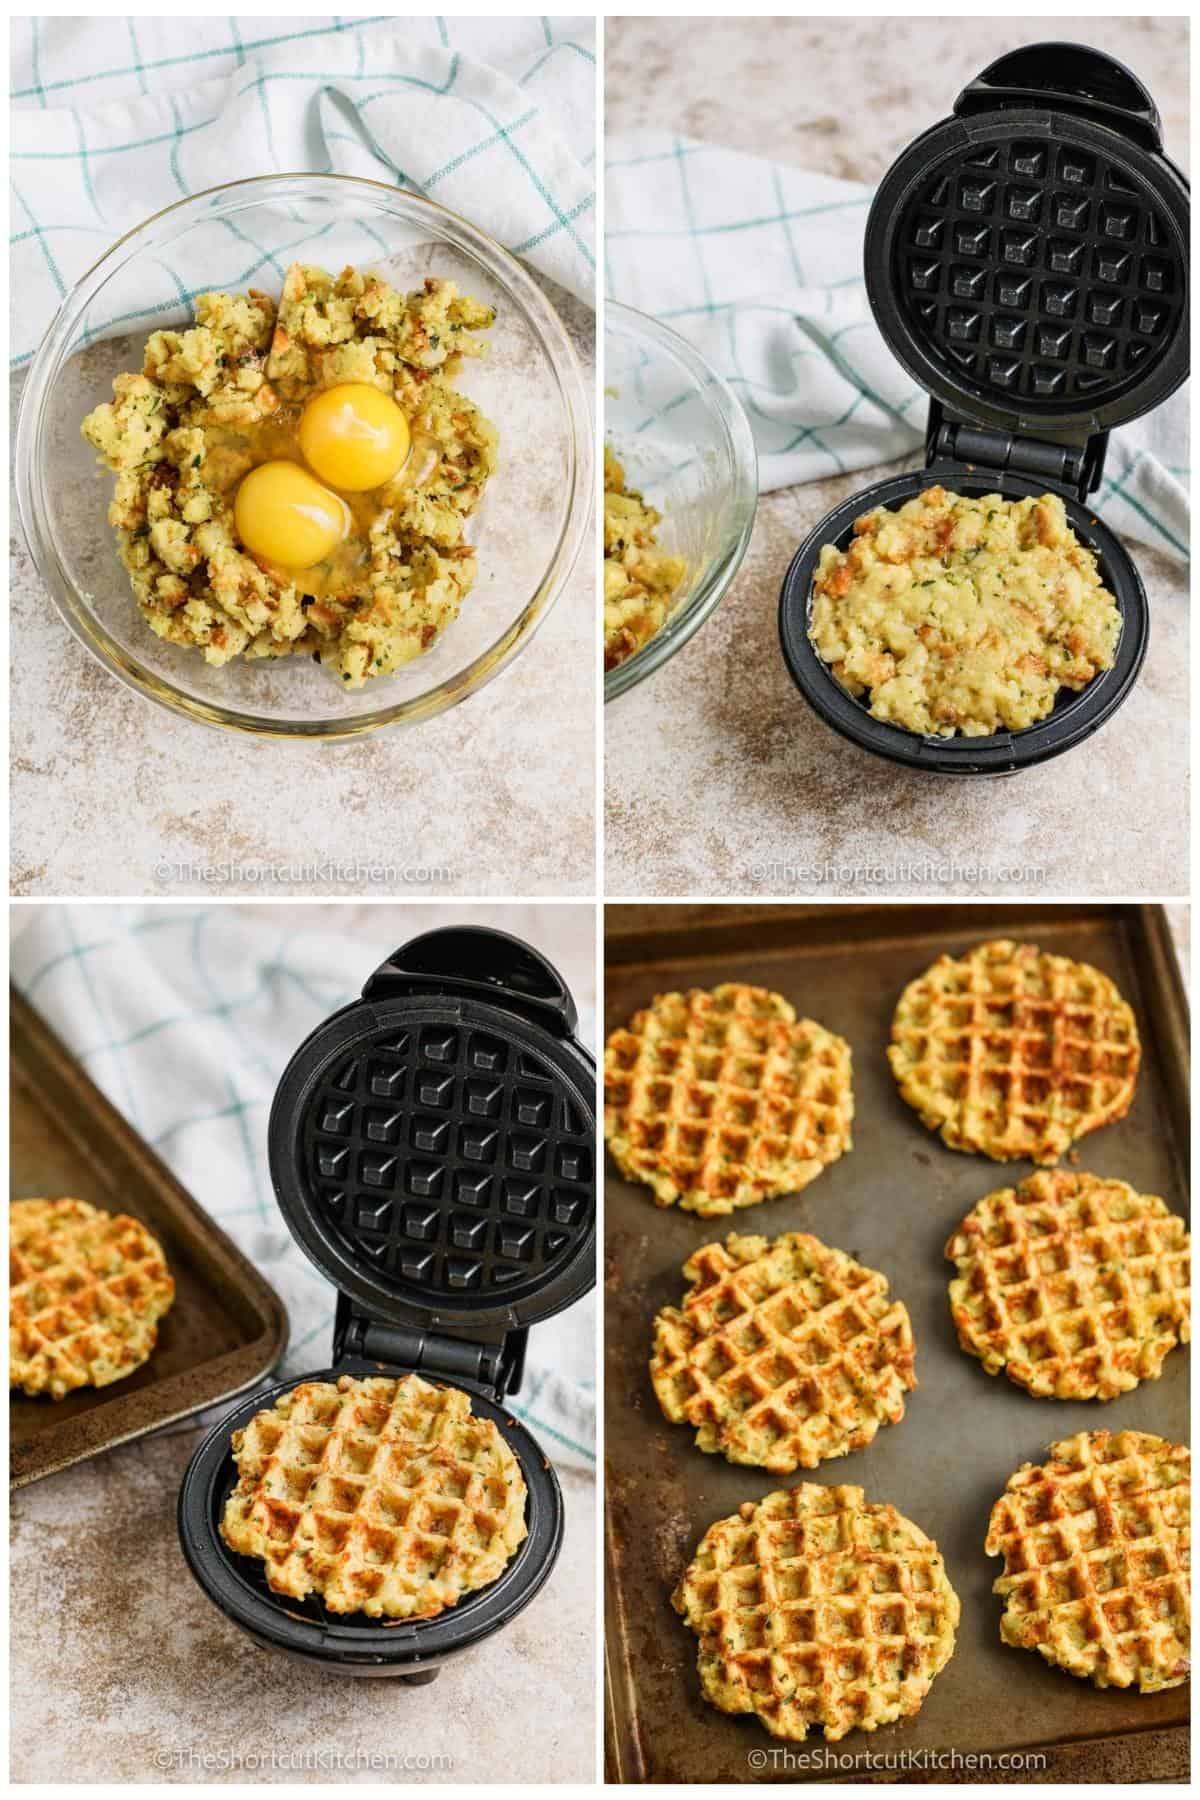 process of adding ingredients together to make Stuffing Waffles